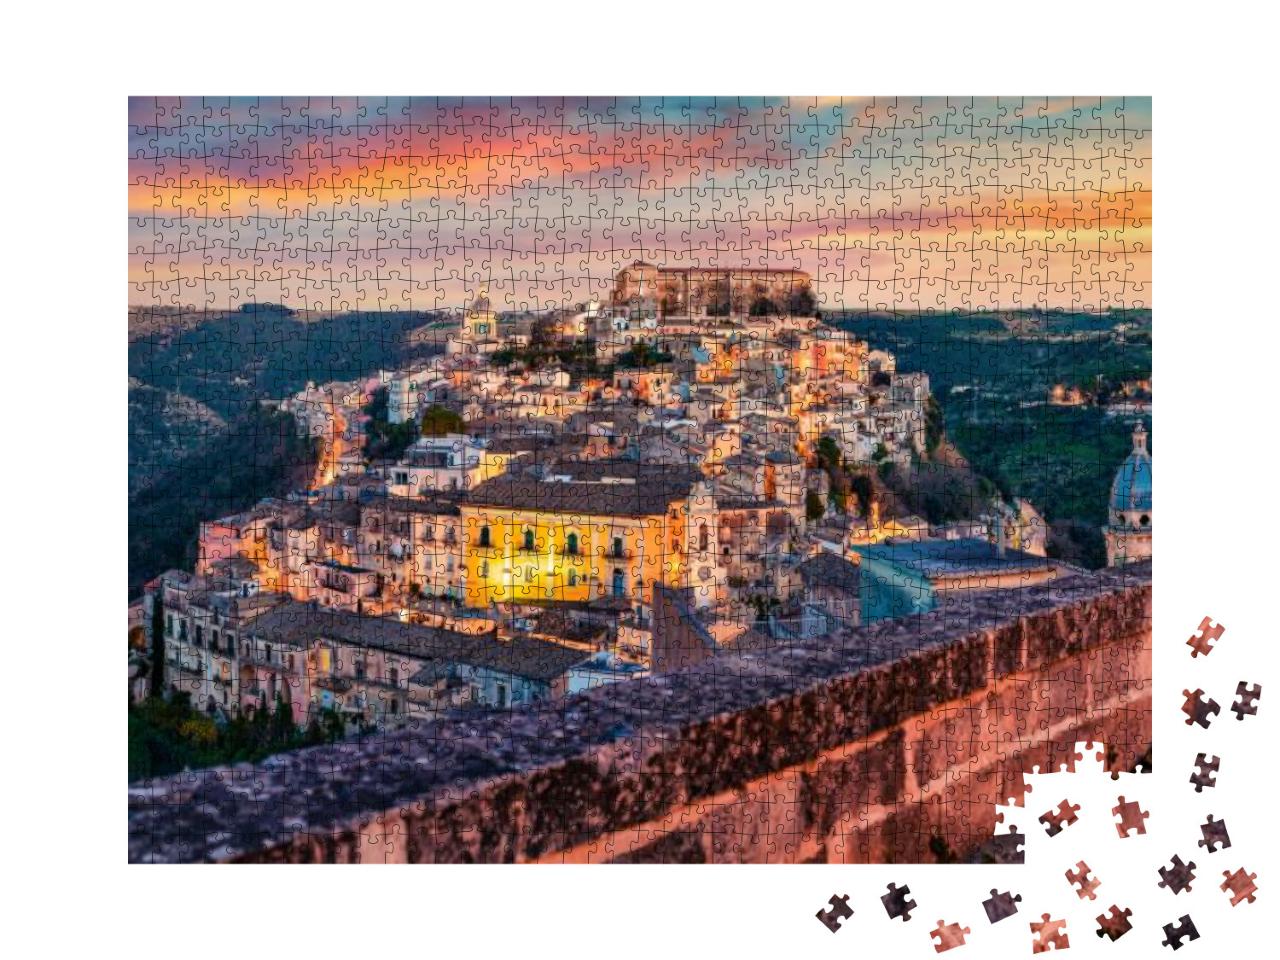 Captivating Summer Cityscape of RagUSA Town with Palazzo C... Jigsaw Puzzle with 1000 pieces